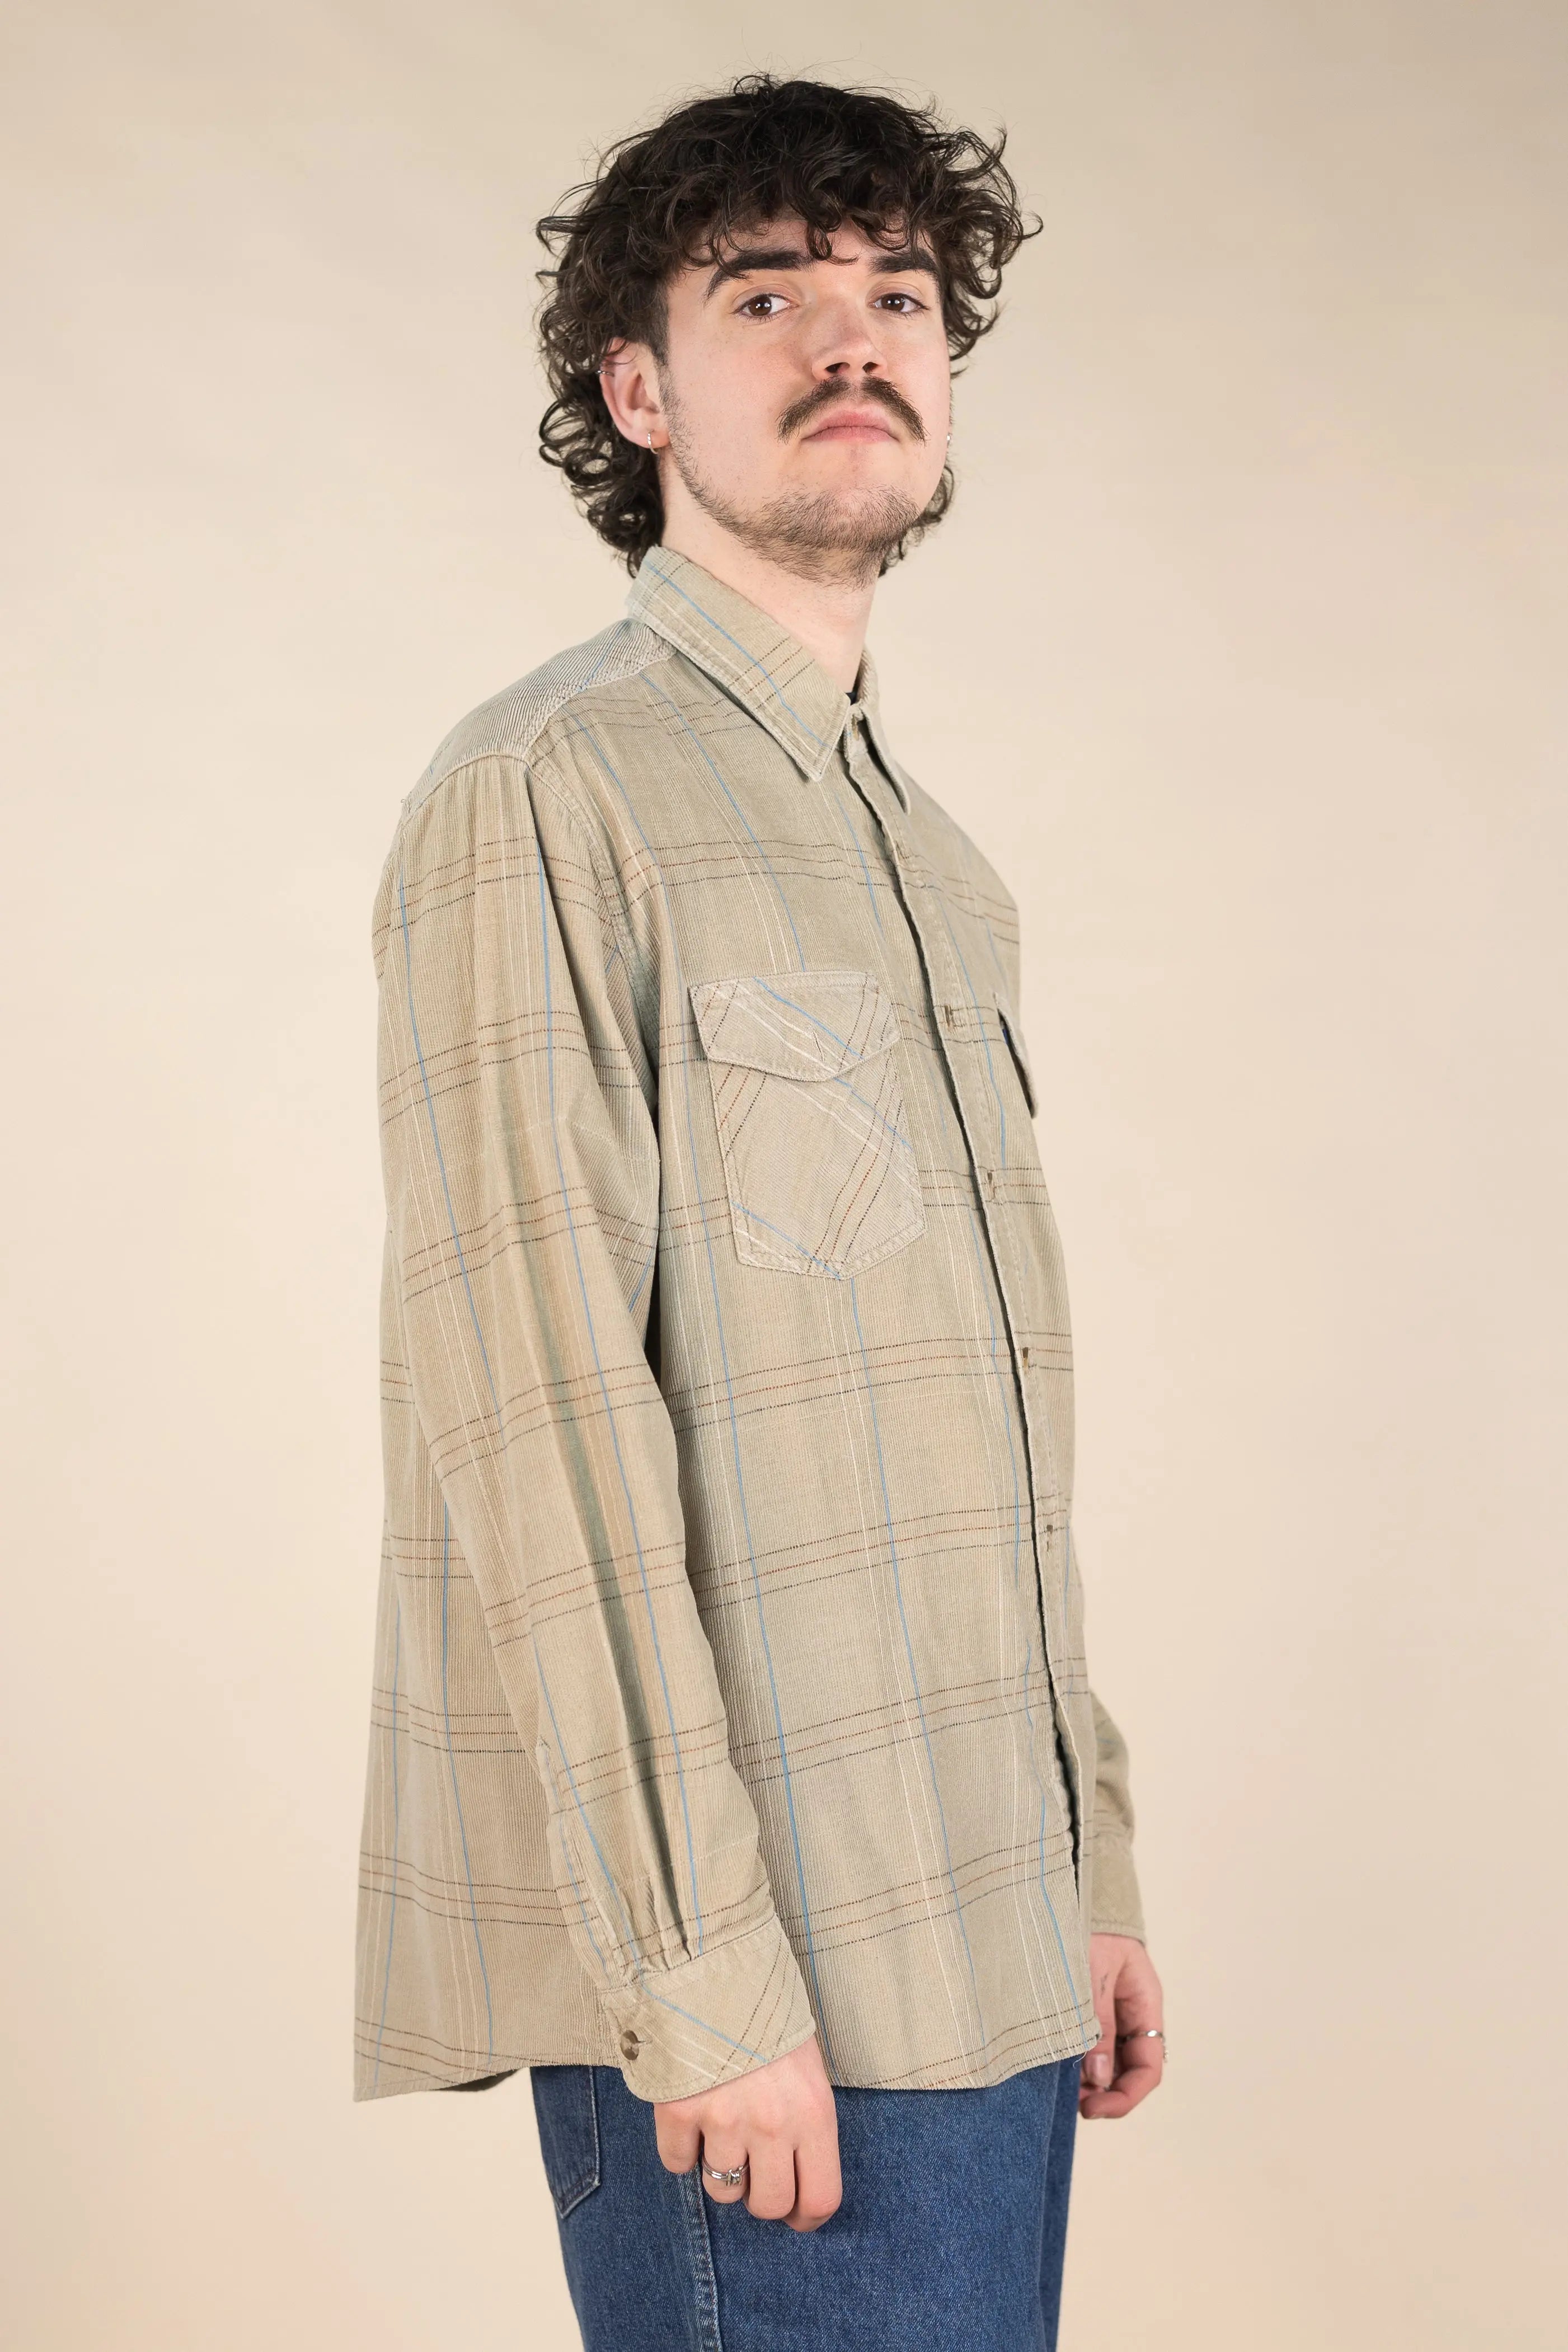 Boston Public - Corduroy Shirt- ThriftTale.com - Vintage and second handclothing